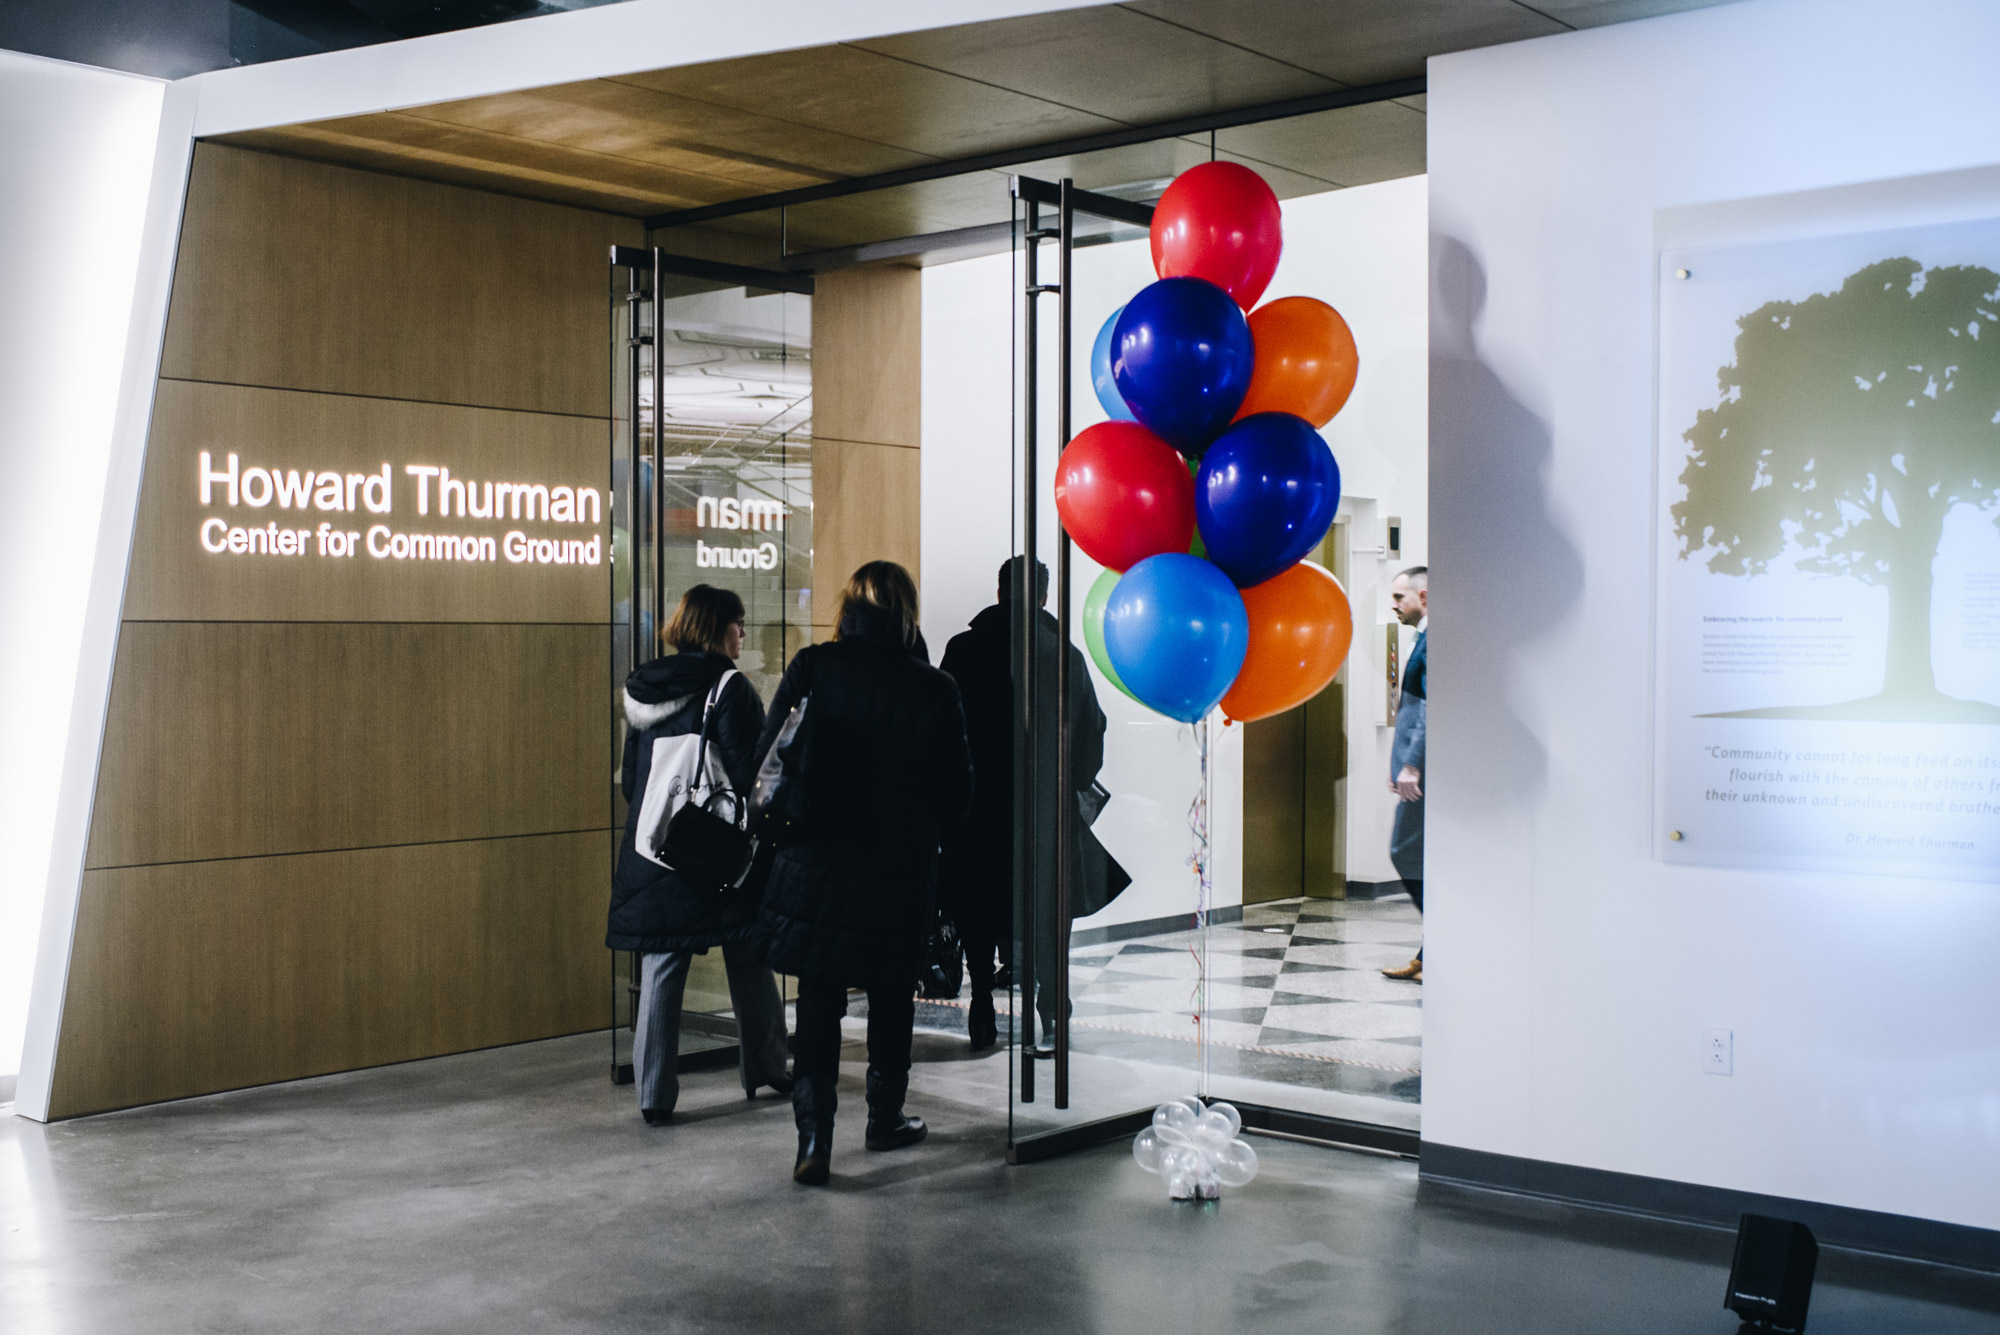 People walk into the brand new Howard Thurman Center during the grand opening. Colorful balloons mark the entrance.